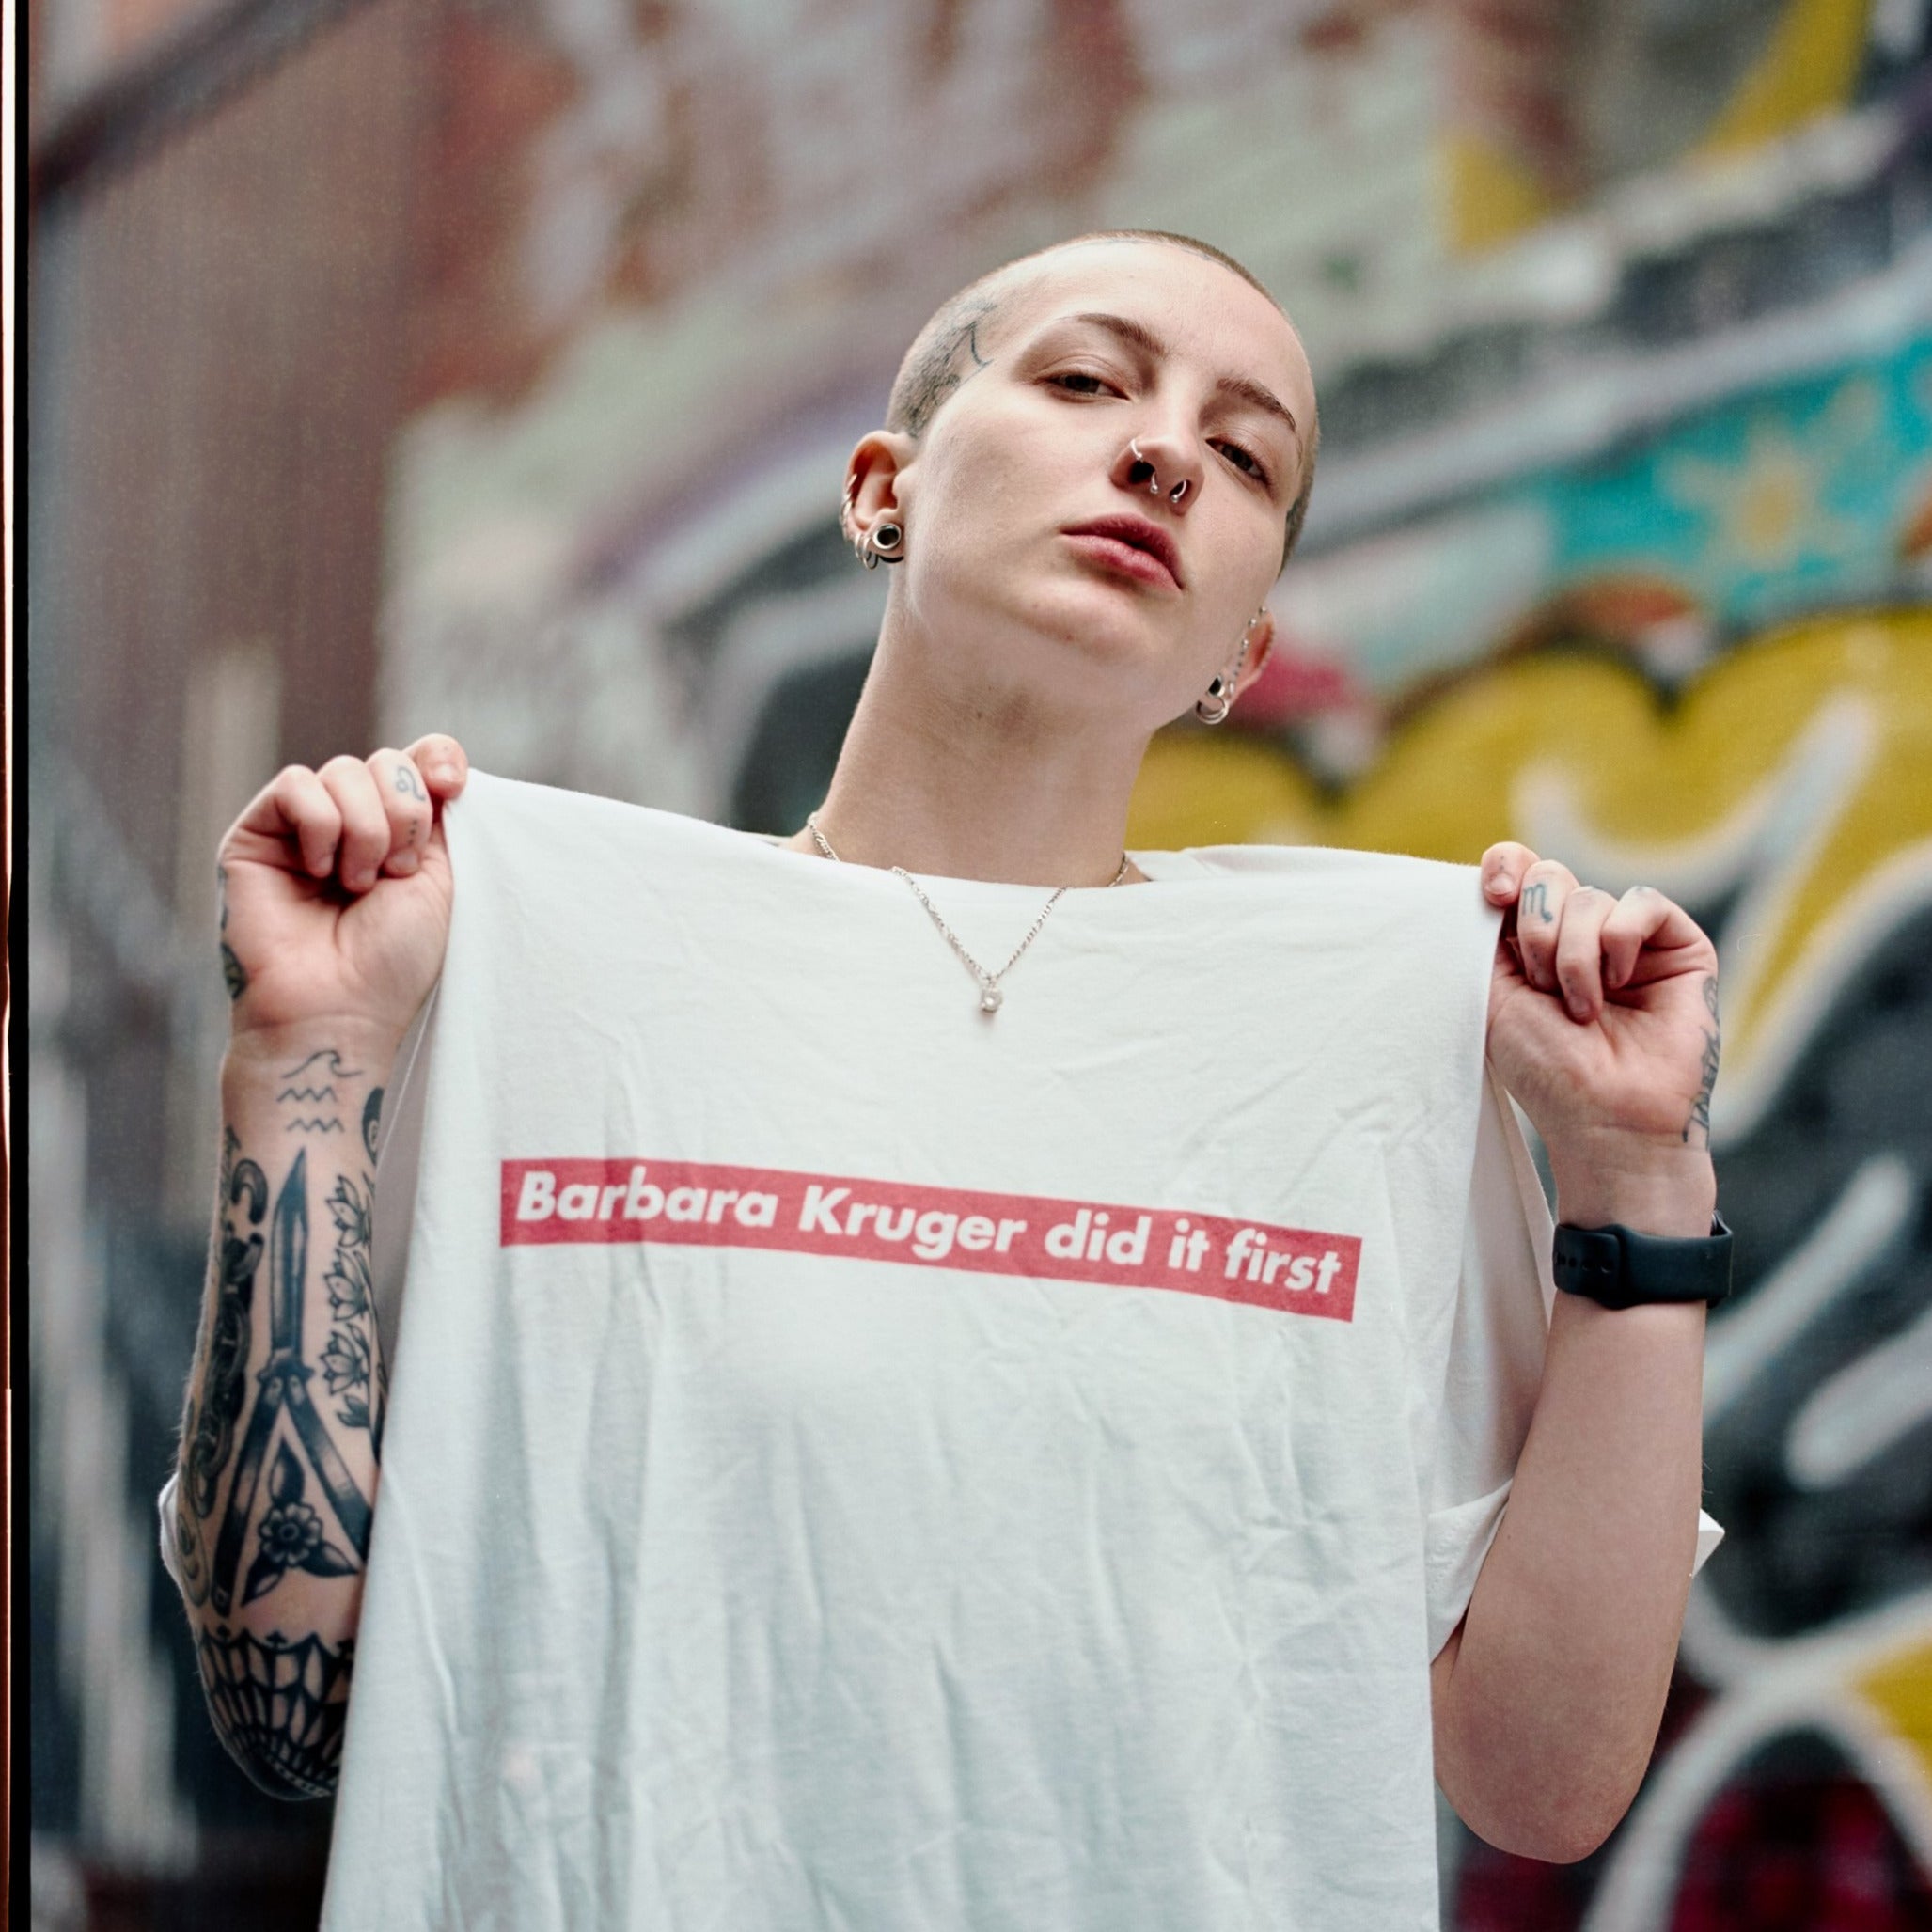 White Feminist T-Shirt - "Barbara Kruger Did It First" Graphic - Shop Empowering Feminist T Shirts